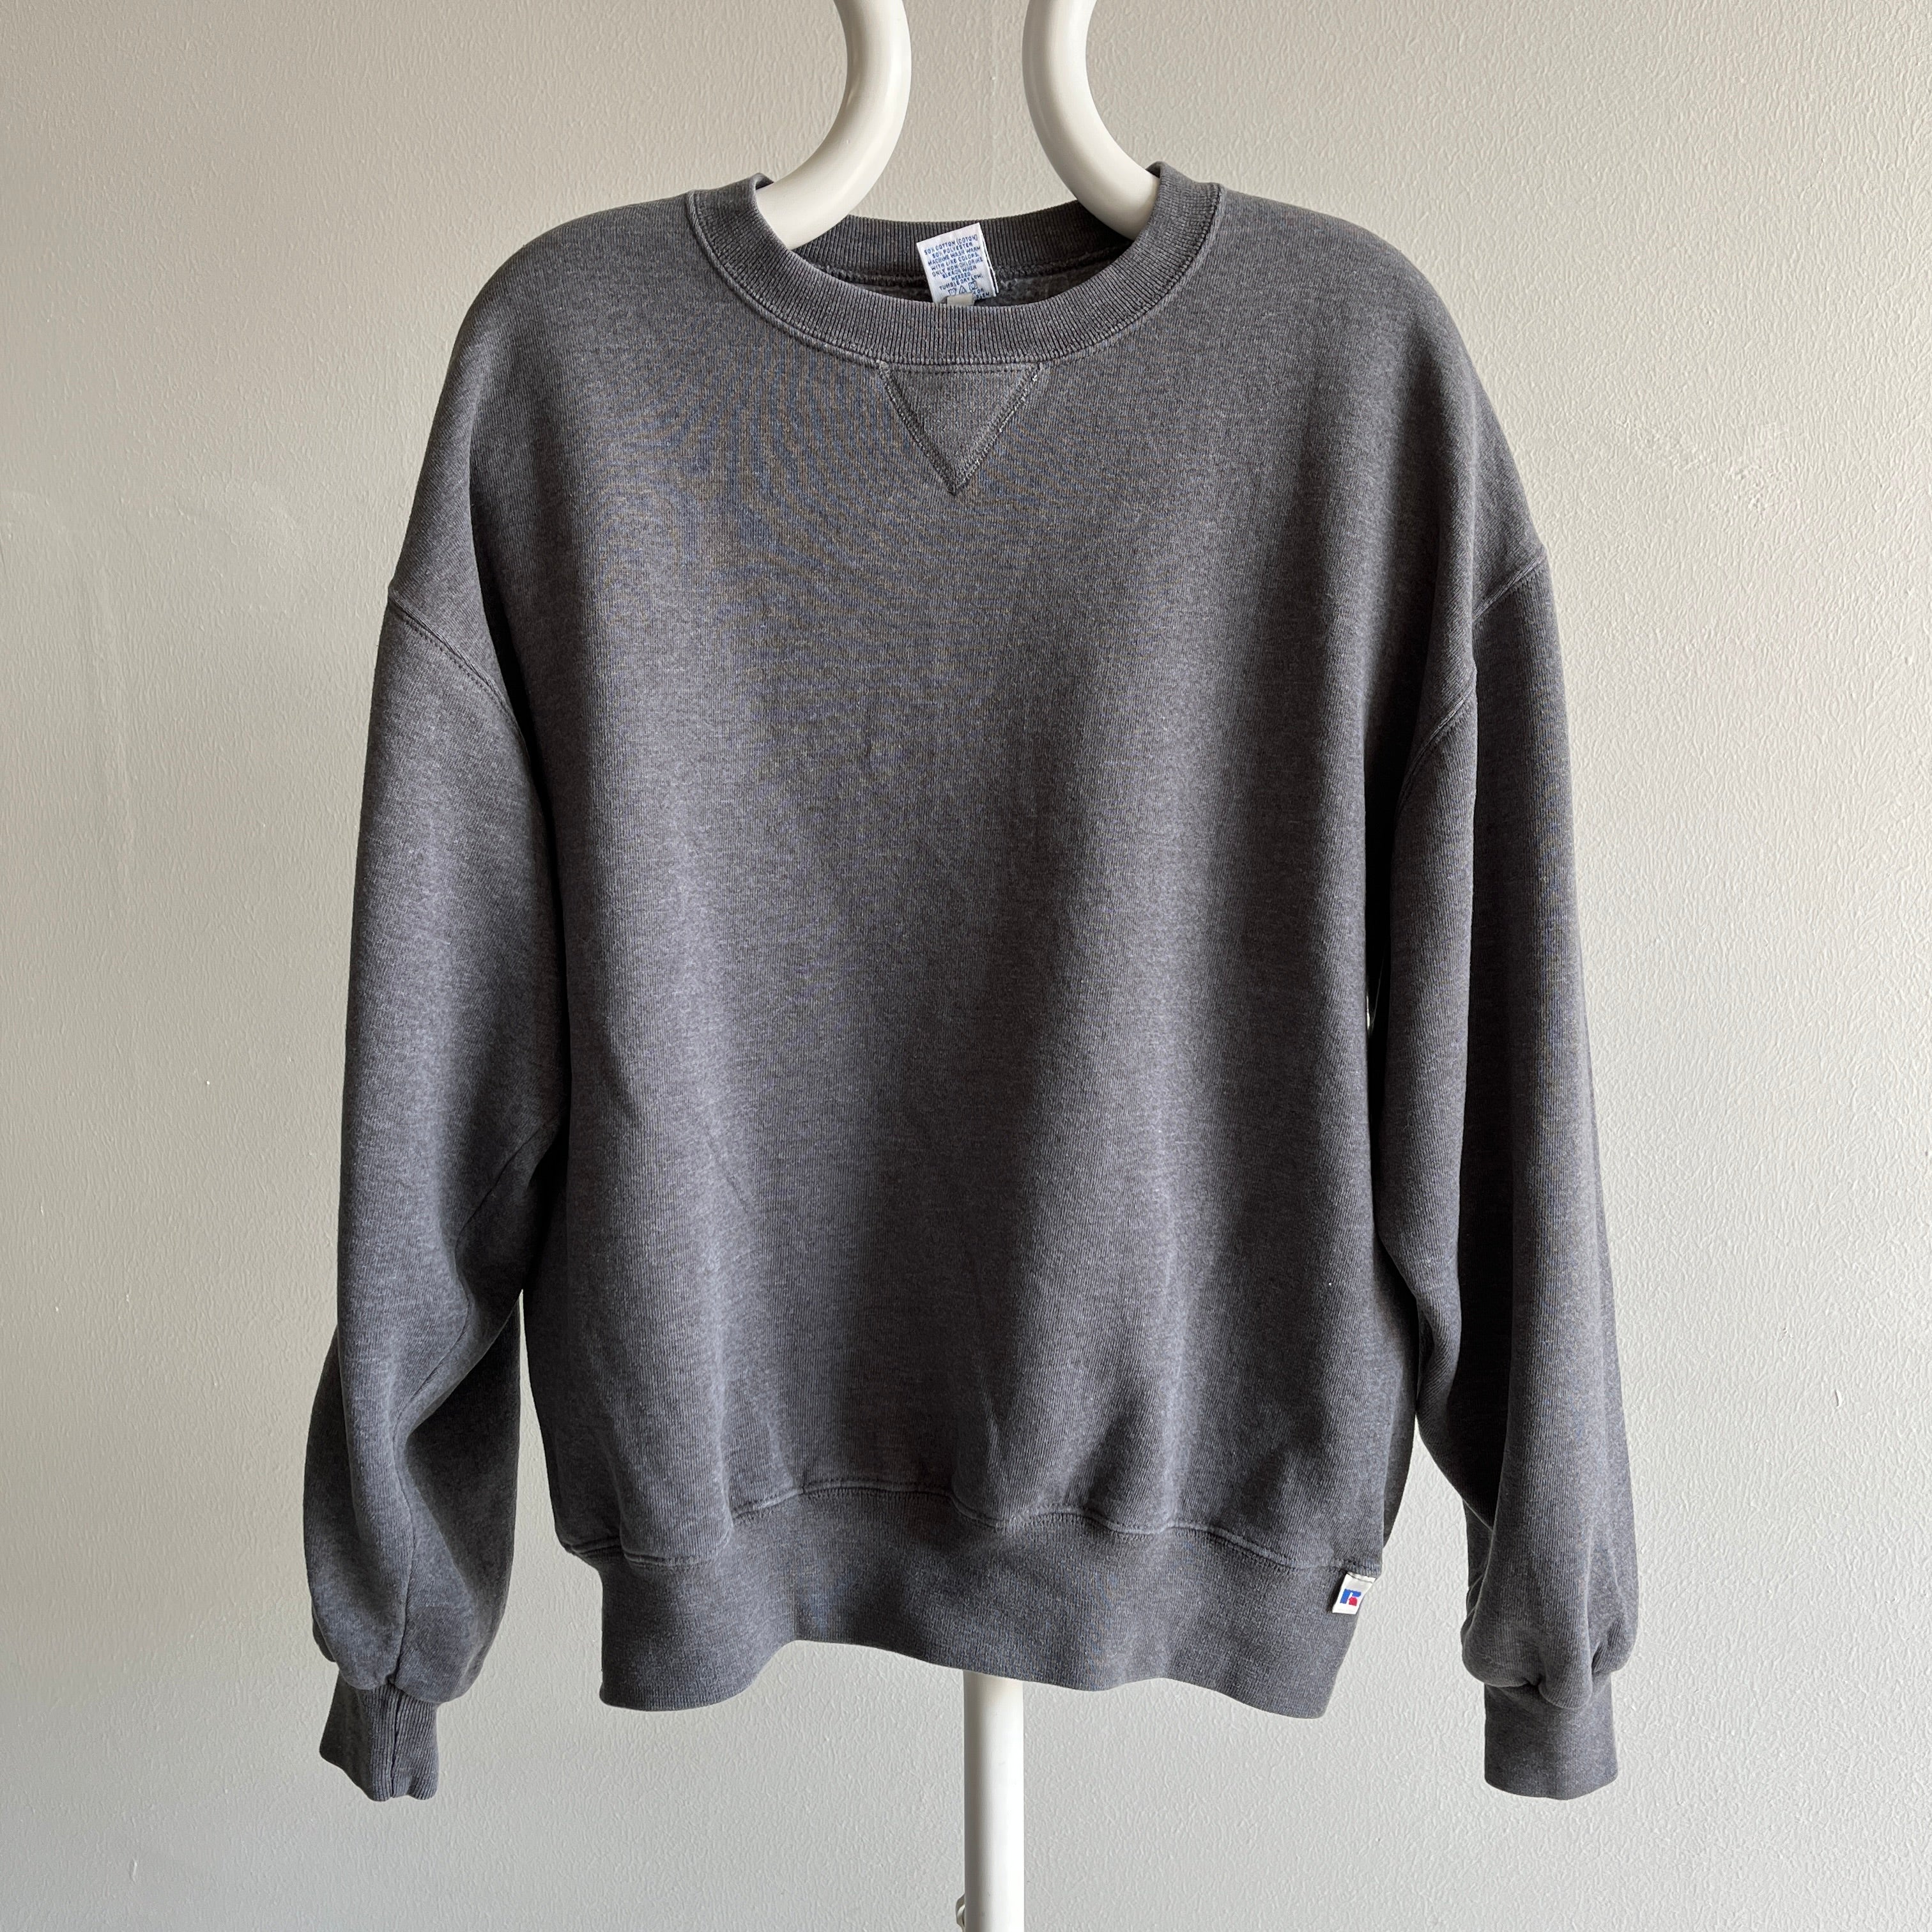 2000s Deep Gray Single V Crewneck by Russell Brand